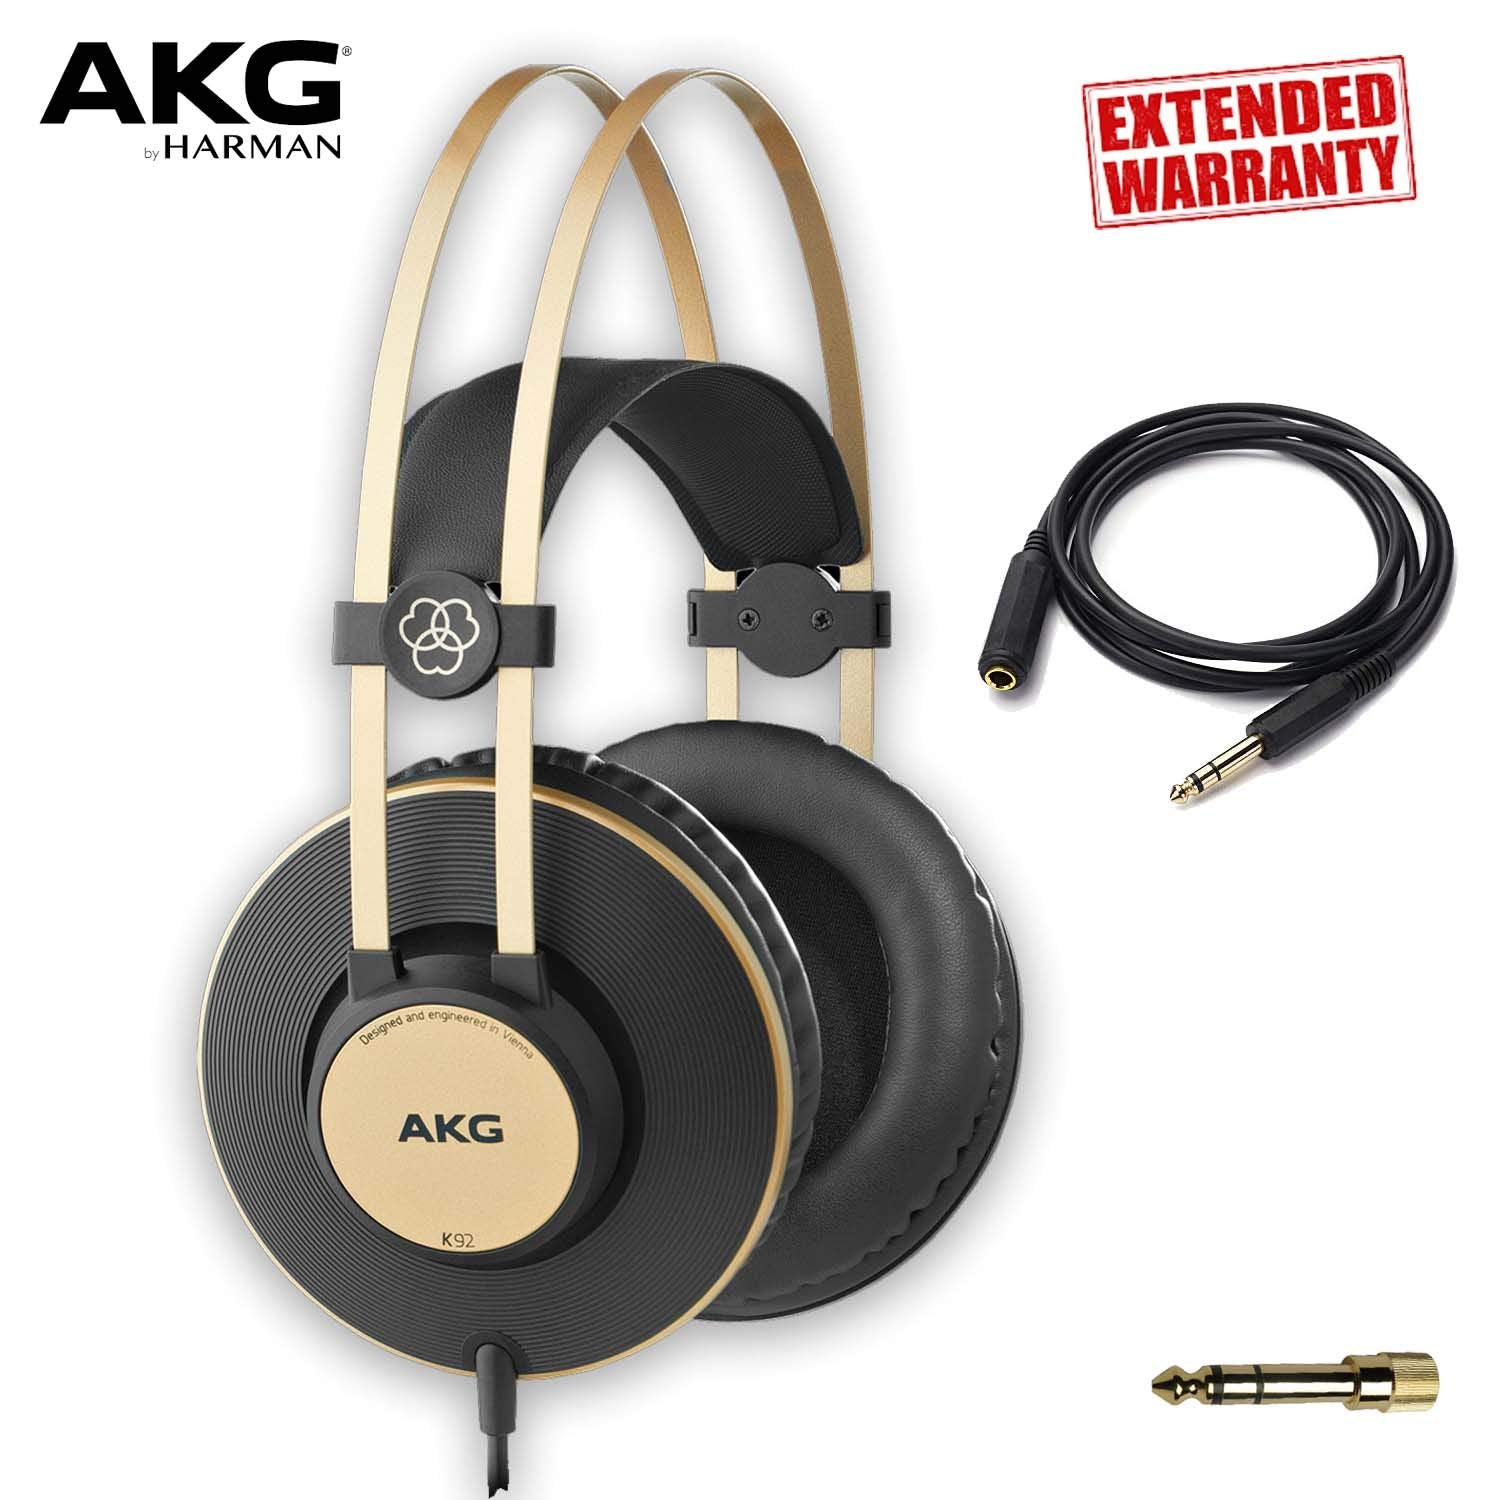 AKG Professional K92 Closed-Back Over-Ear Studio Headphones with Headphone Extender and 1-Year Extended Warranty